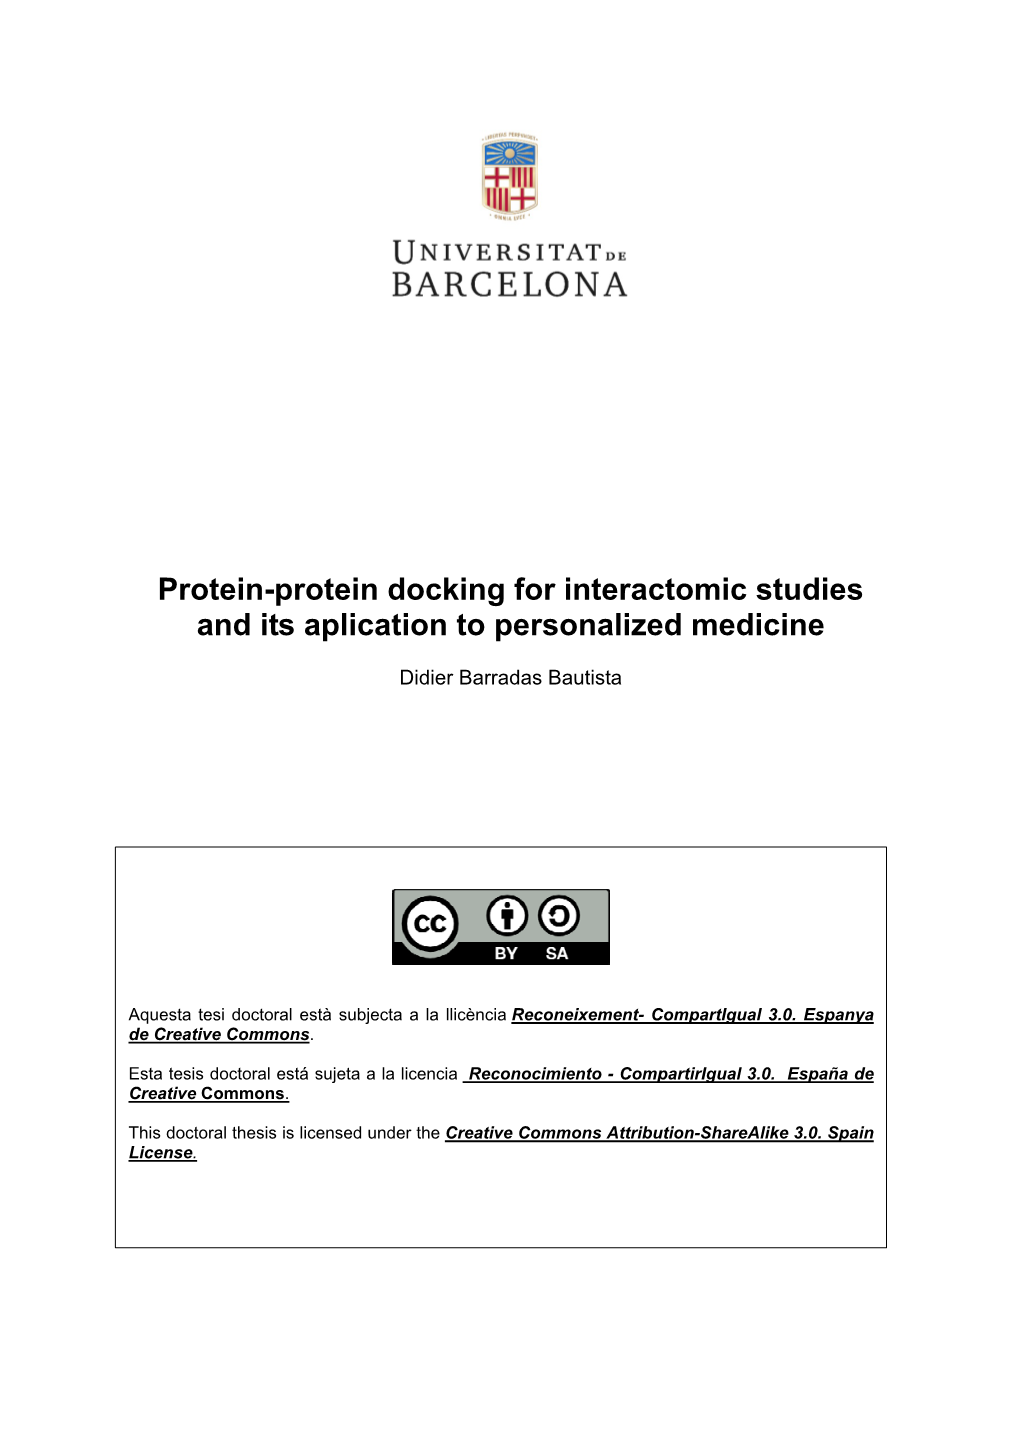 Protein-Protein Docking for Interactomic Studies and Its Aplication to Personalized Medicine